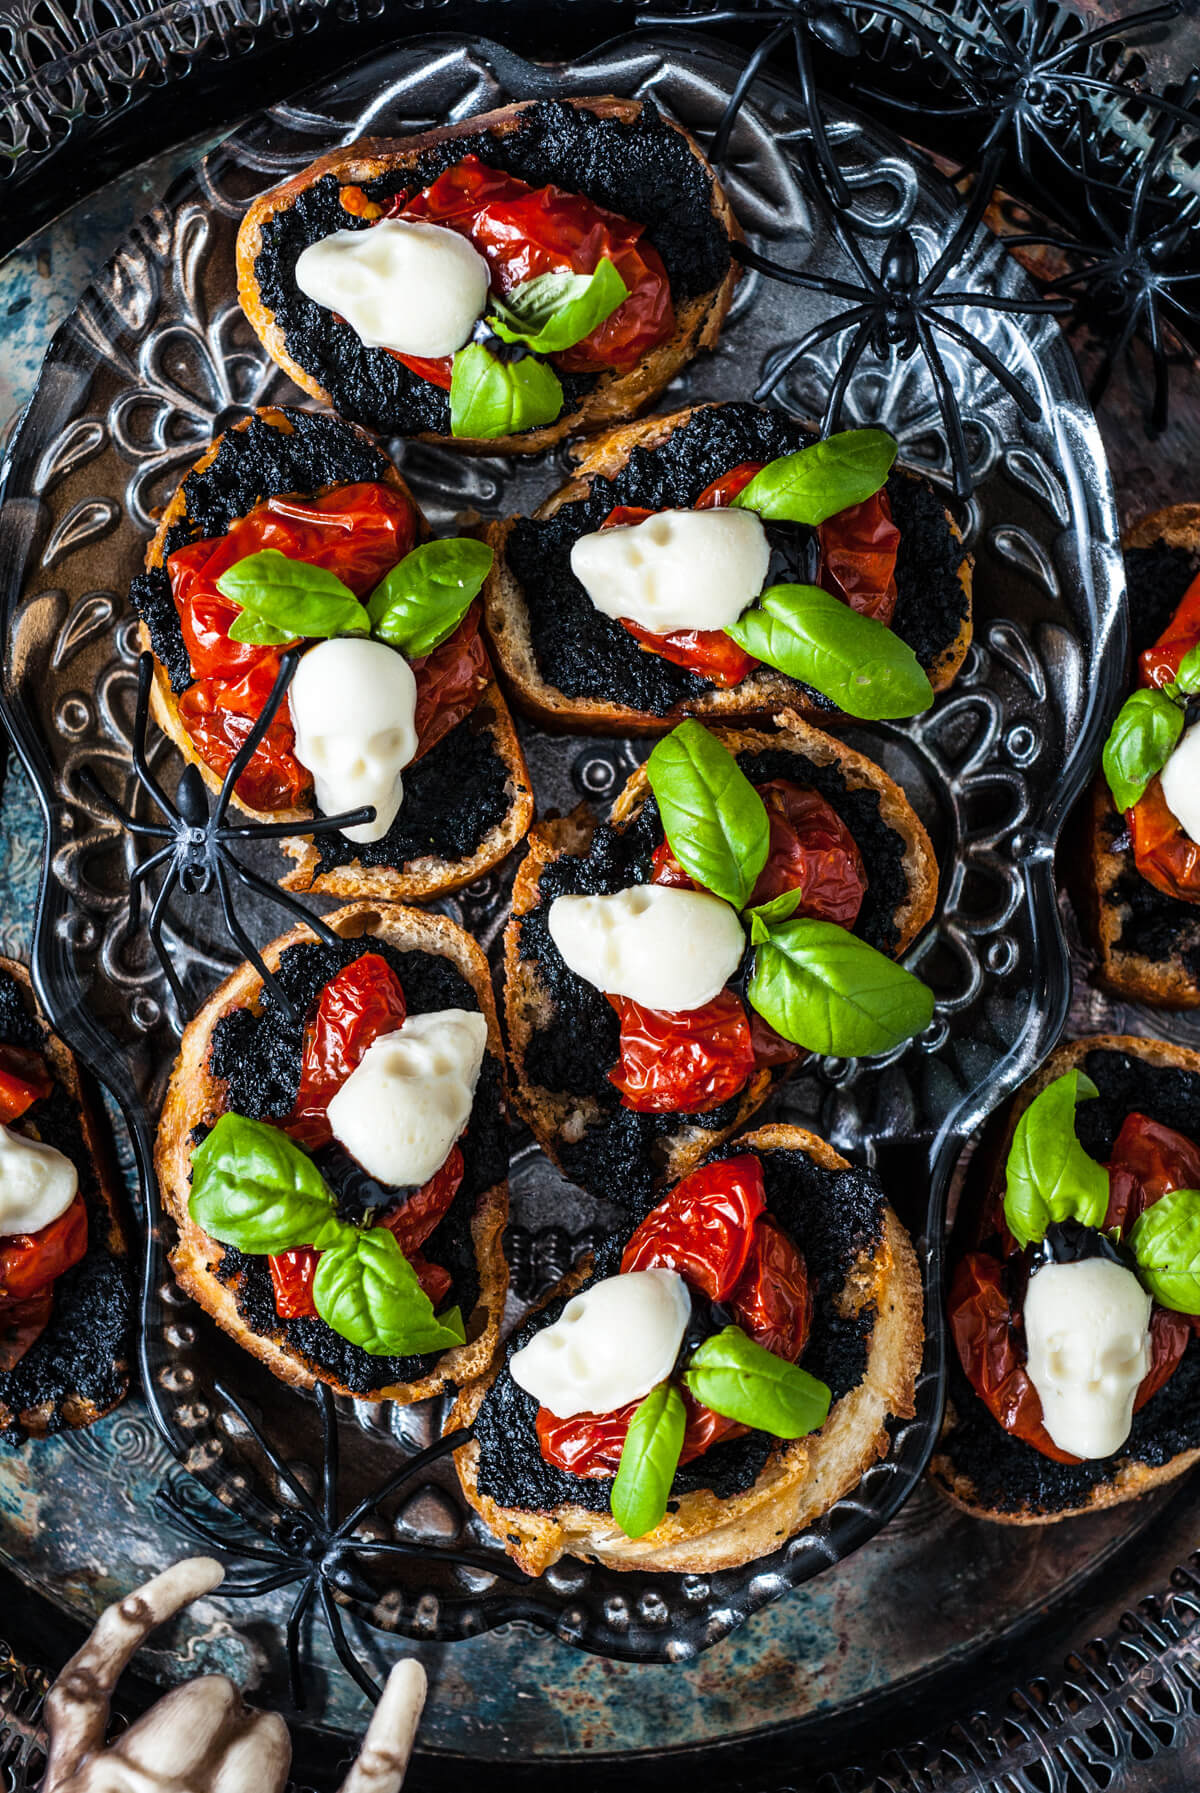 A spooky scene featuring a silver tray of caprese crostini decorated with mozzarella skulls and spiders.